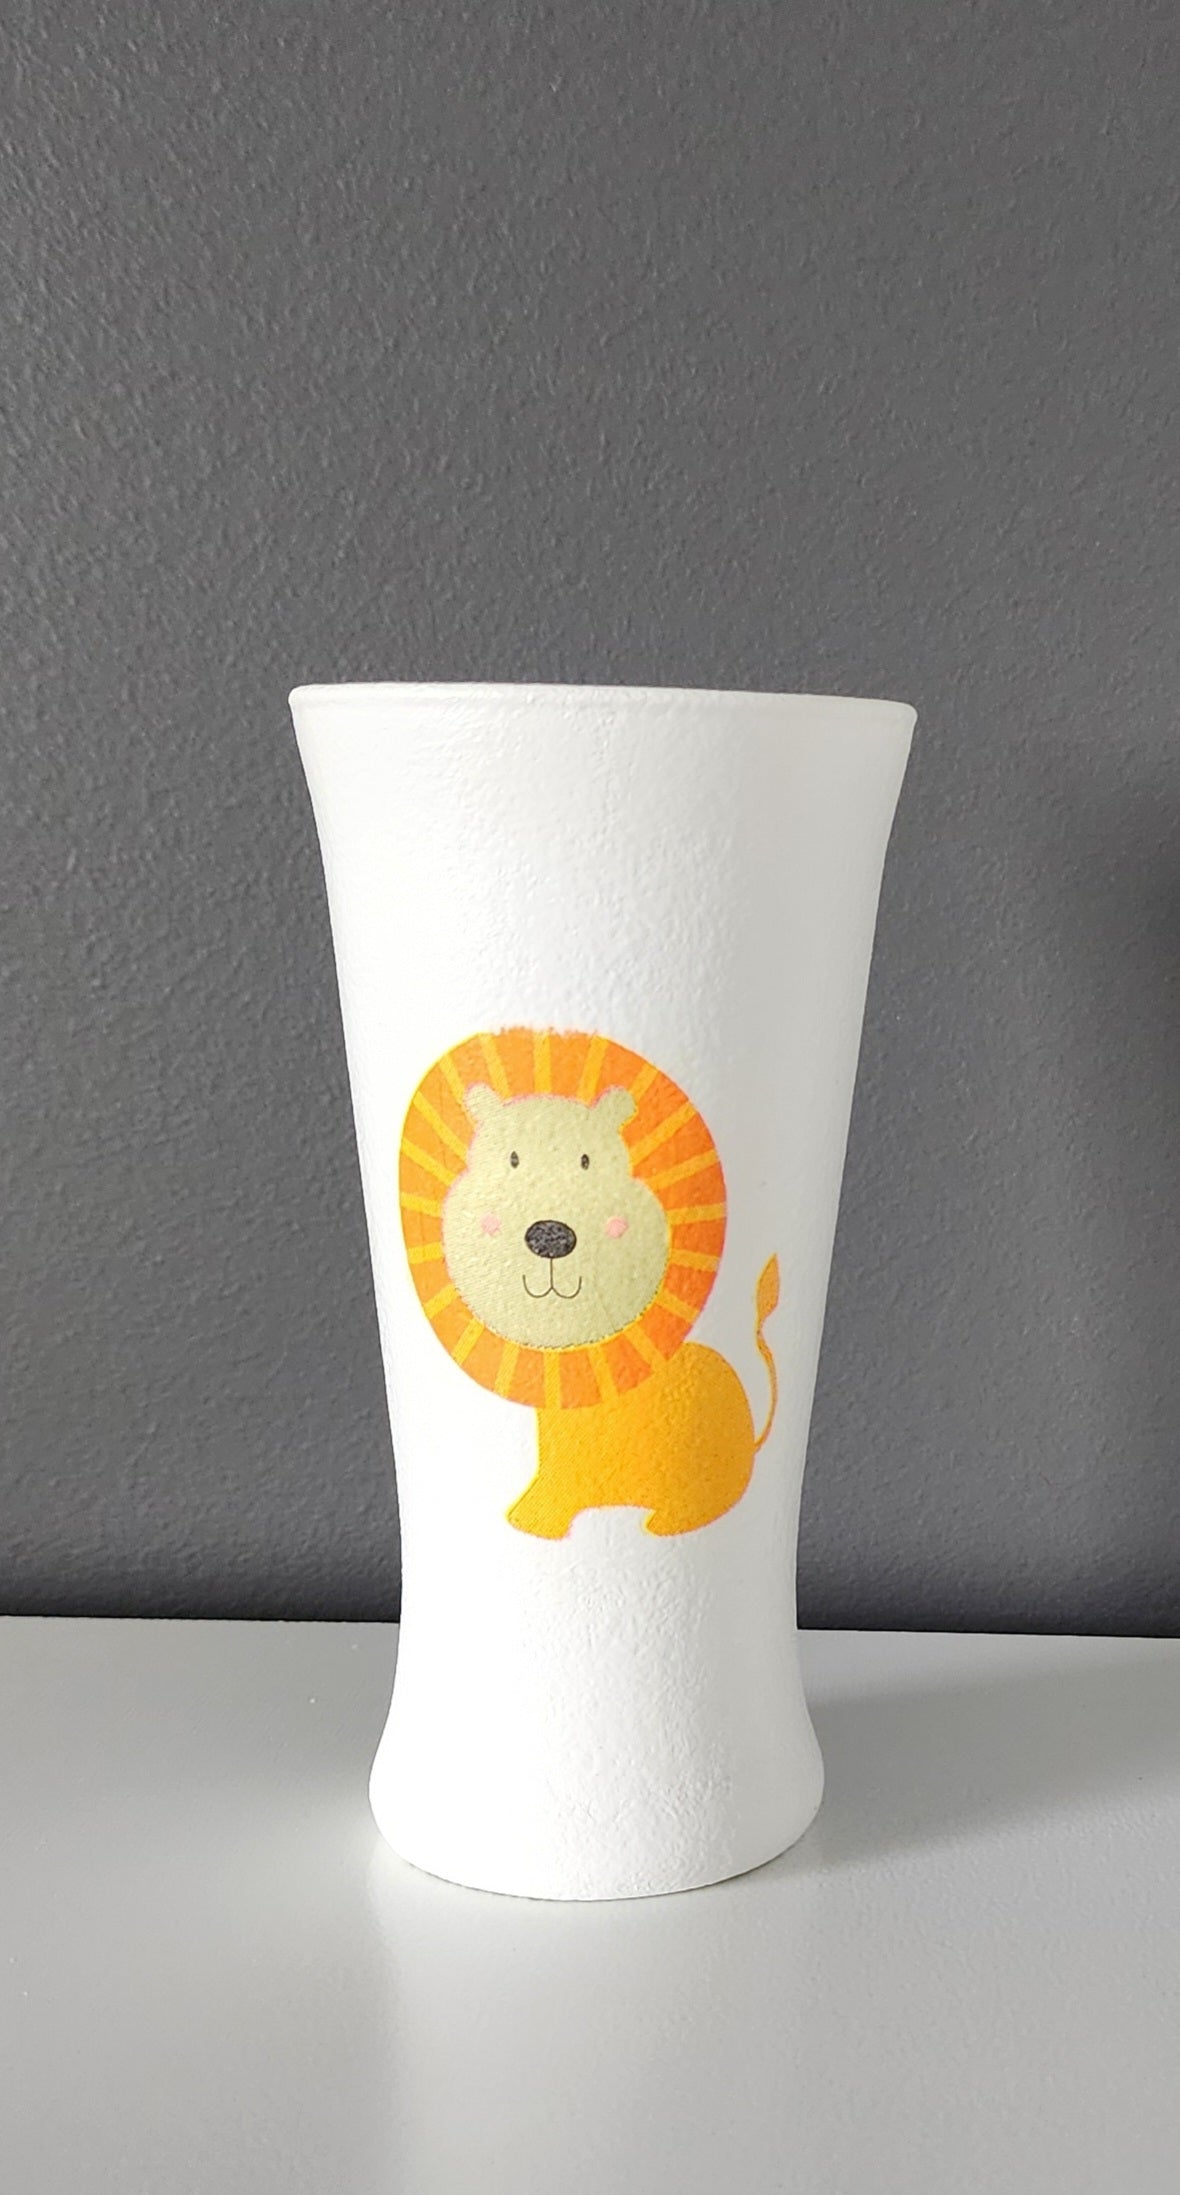 Lion and Elephant Set - Toothbrush Holders